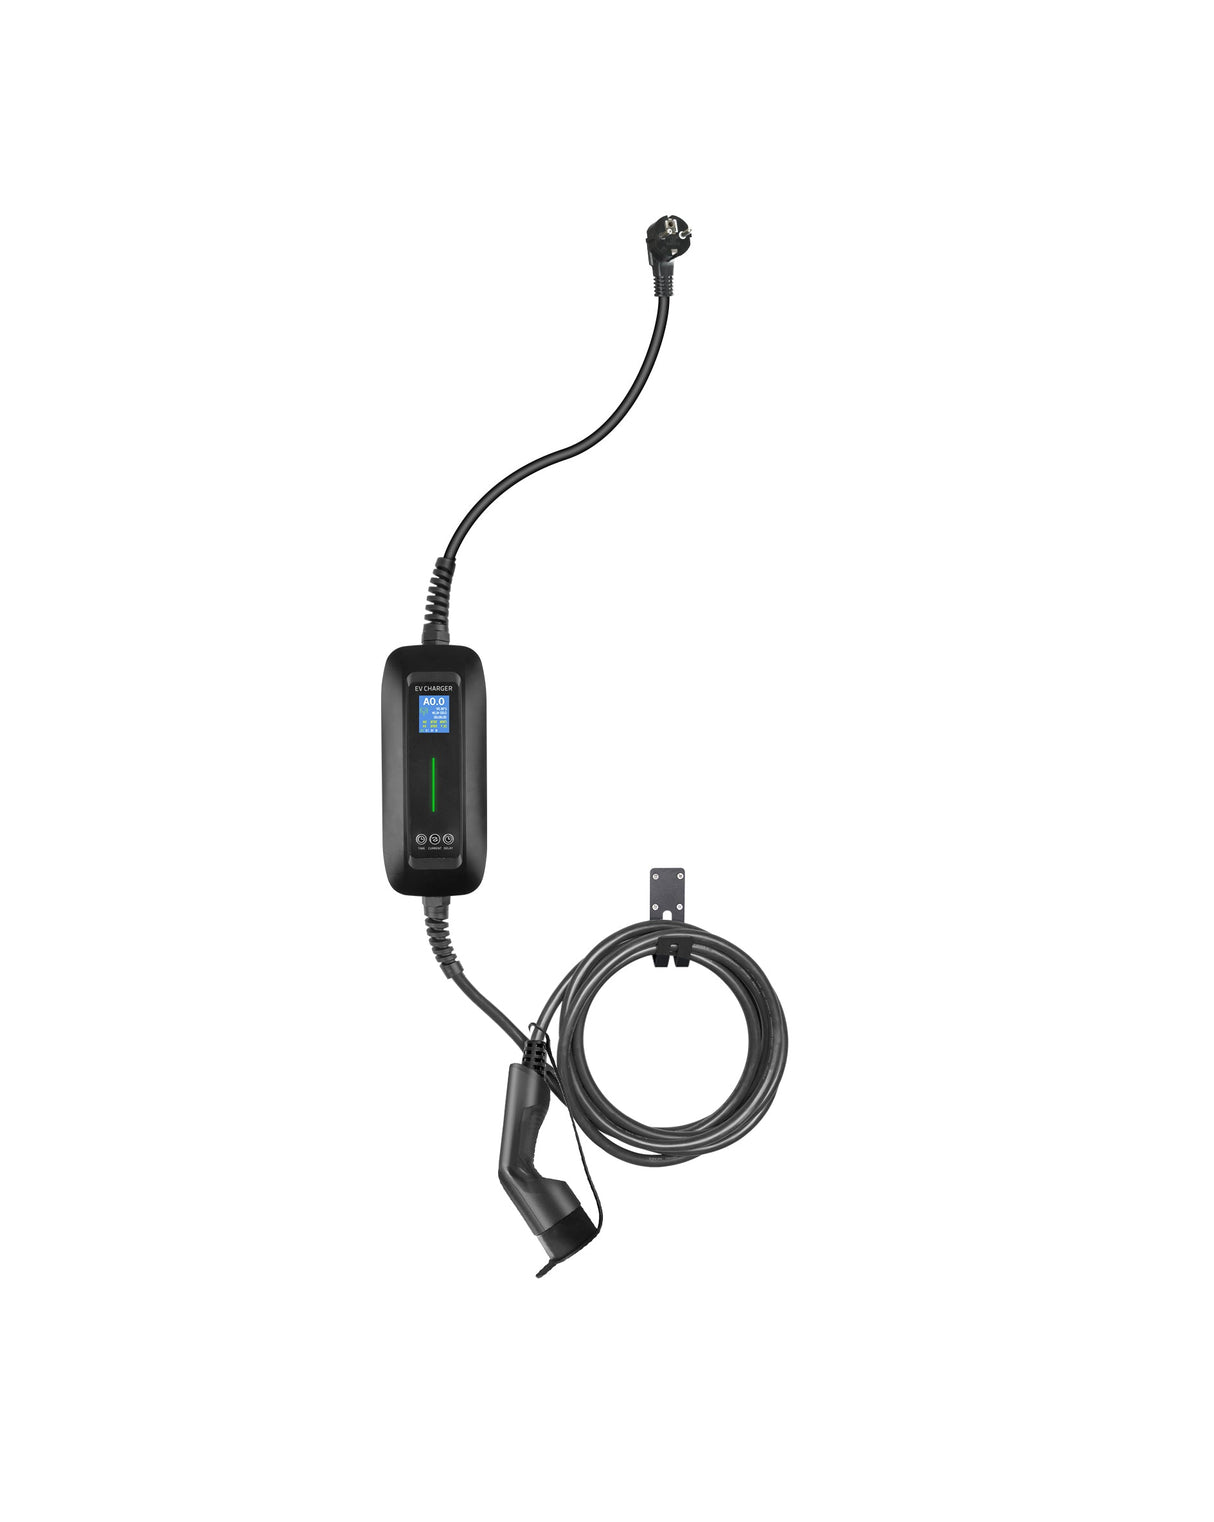 Mobile Charger Lightyear One - LCD Black Type 2 to Schuko - Delayed charging and Memory function